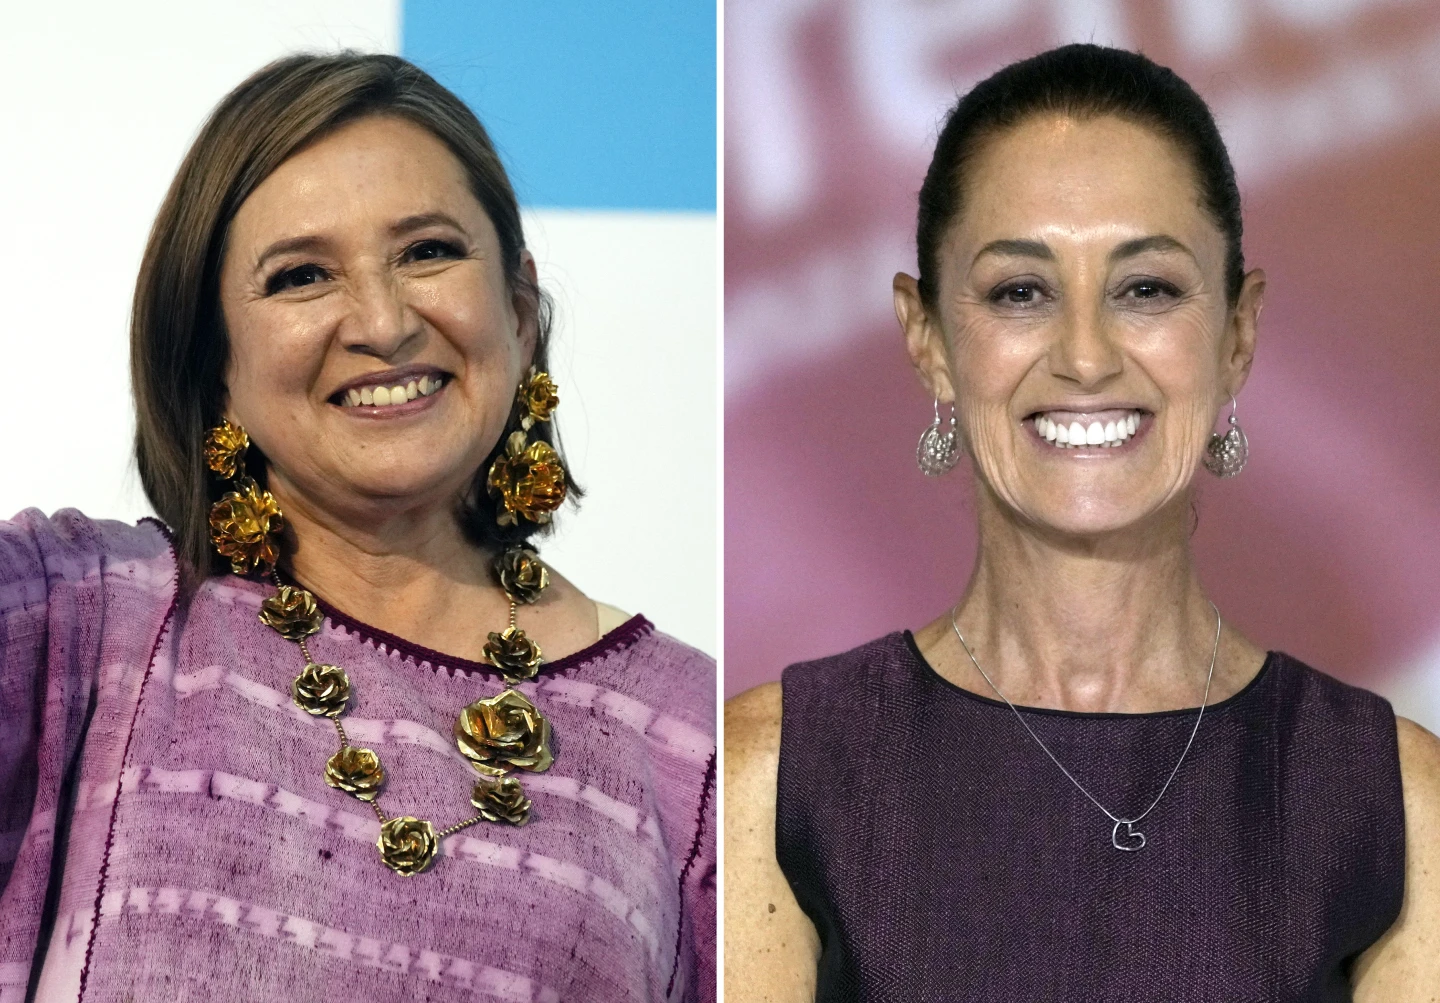 As Two Women Vie for Mexico’s Presidency, Why Are There Questions About Their Ability to Govern?